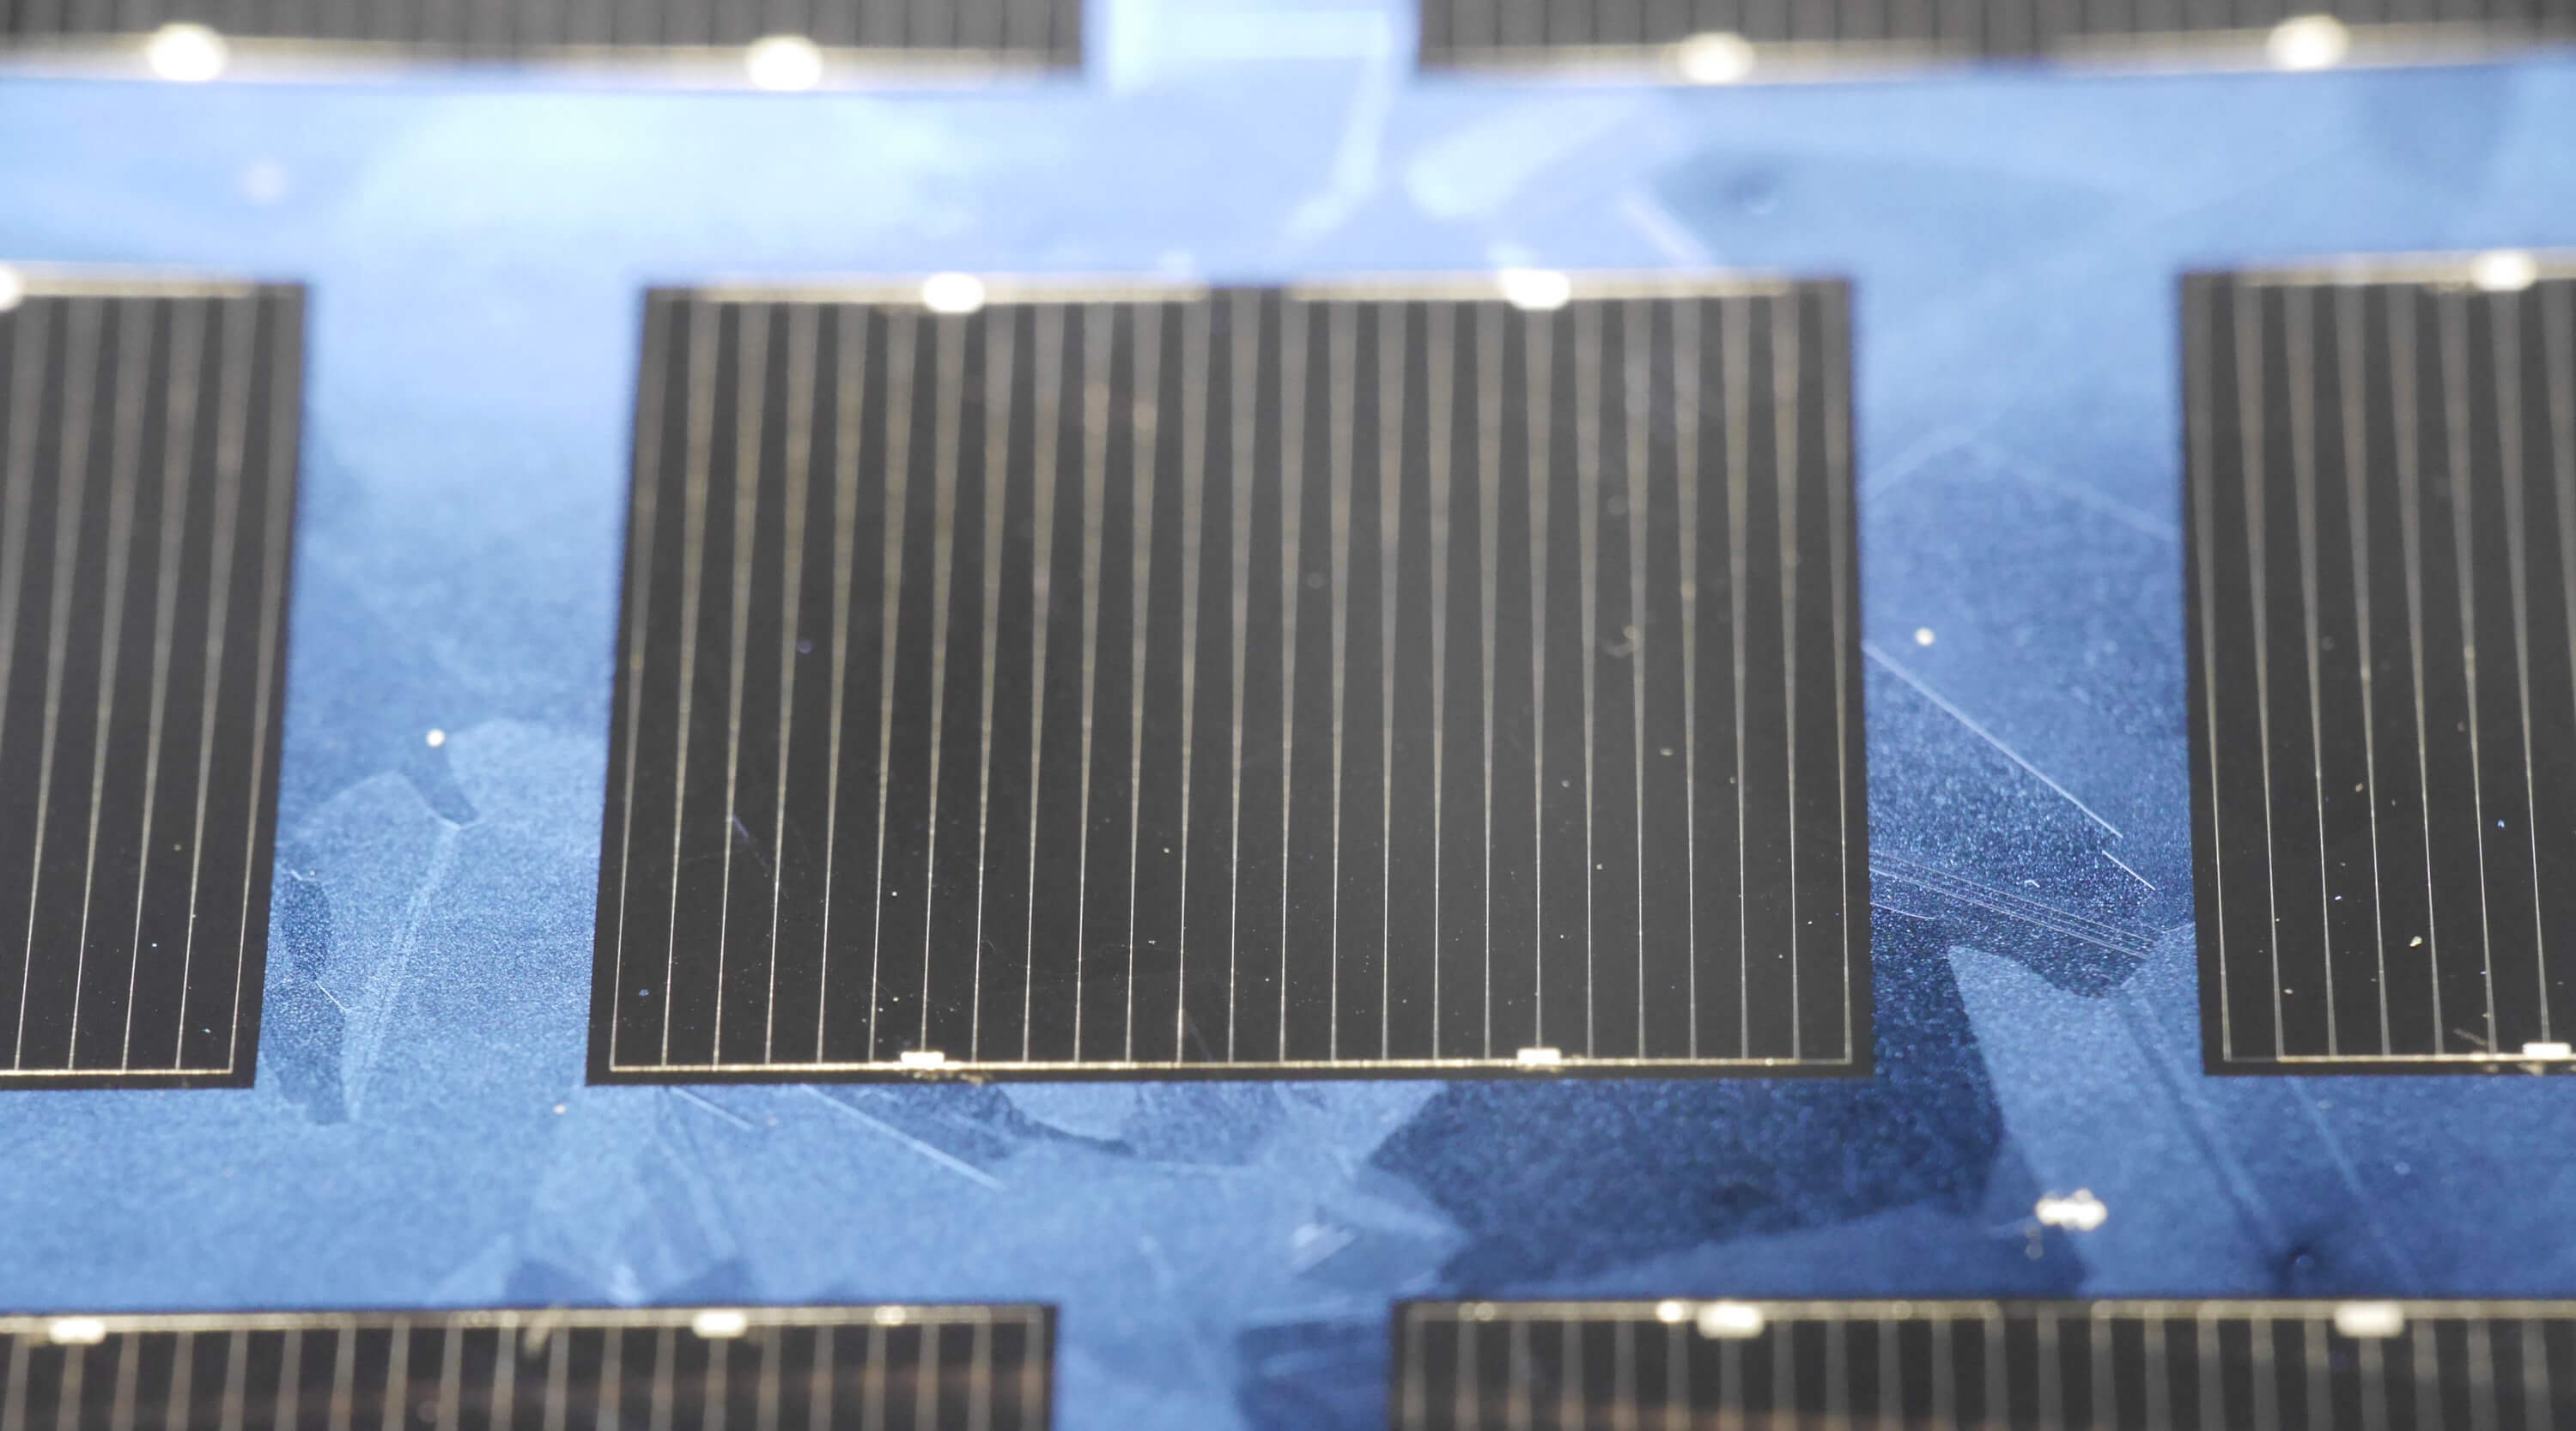 multicrystalline world record solar cell made of n-type HPM silicon 